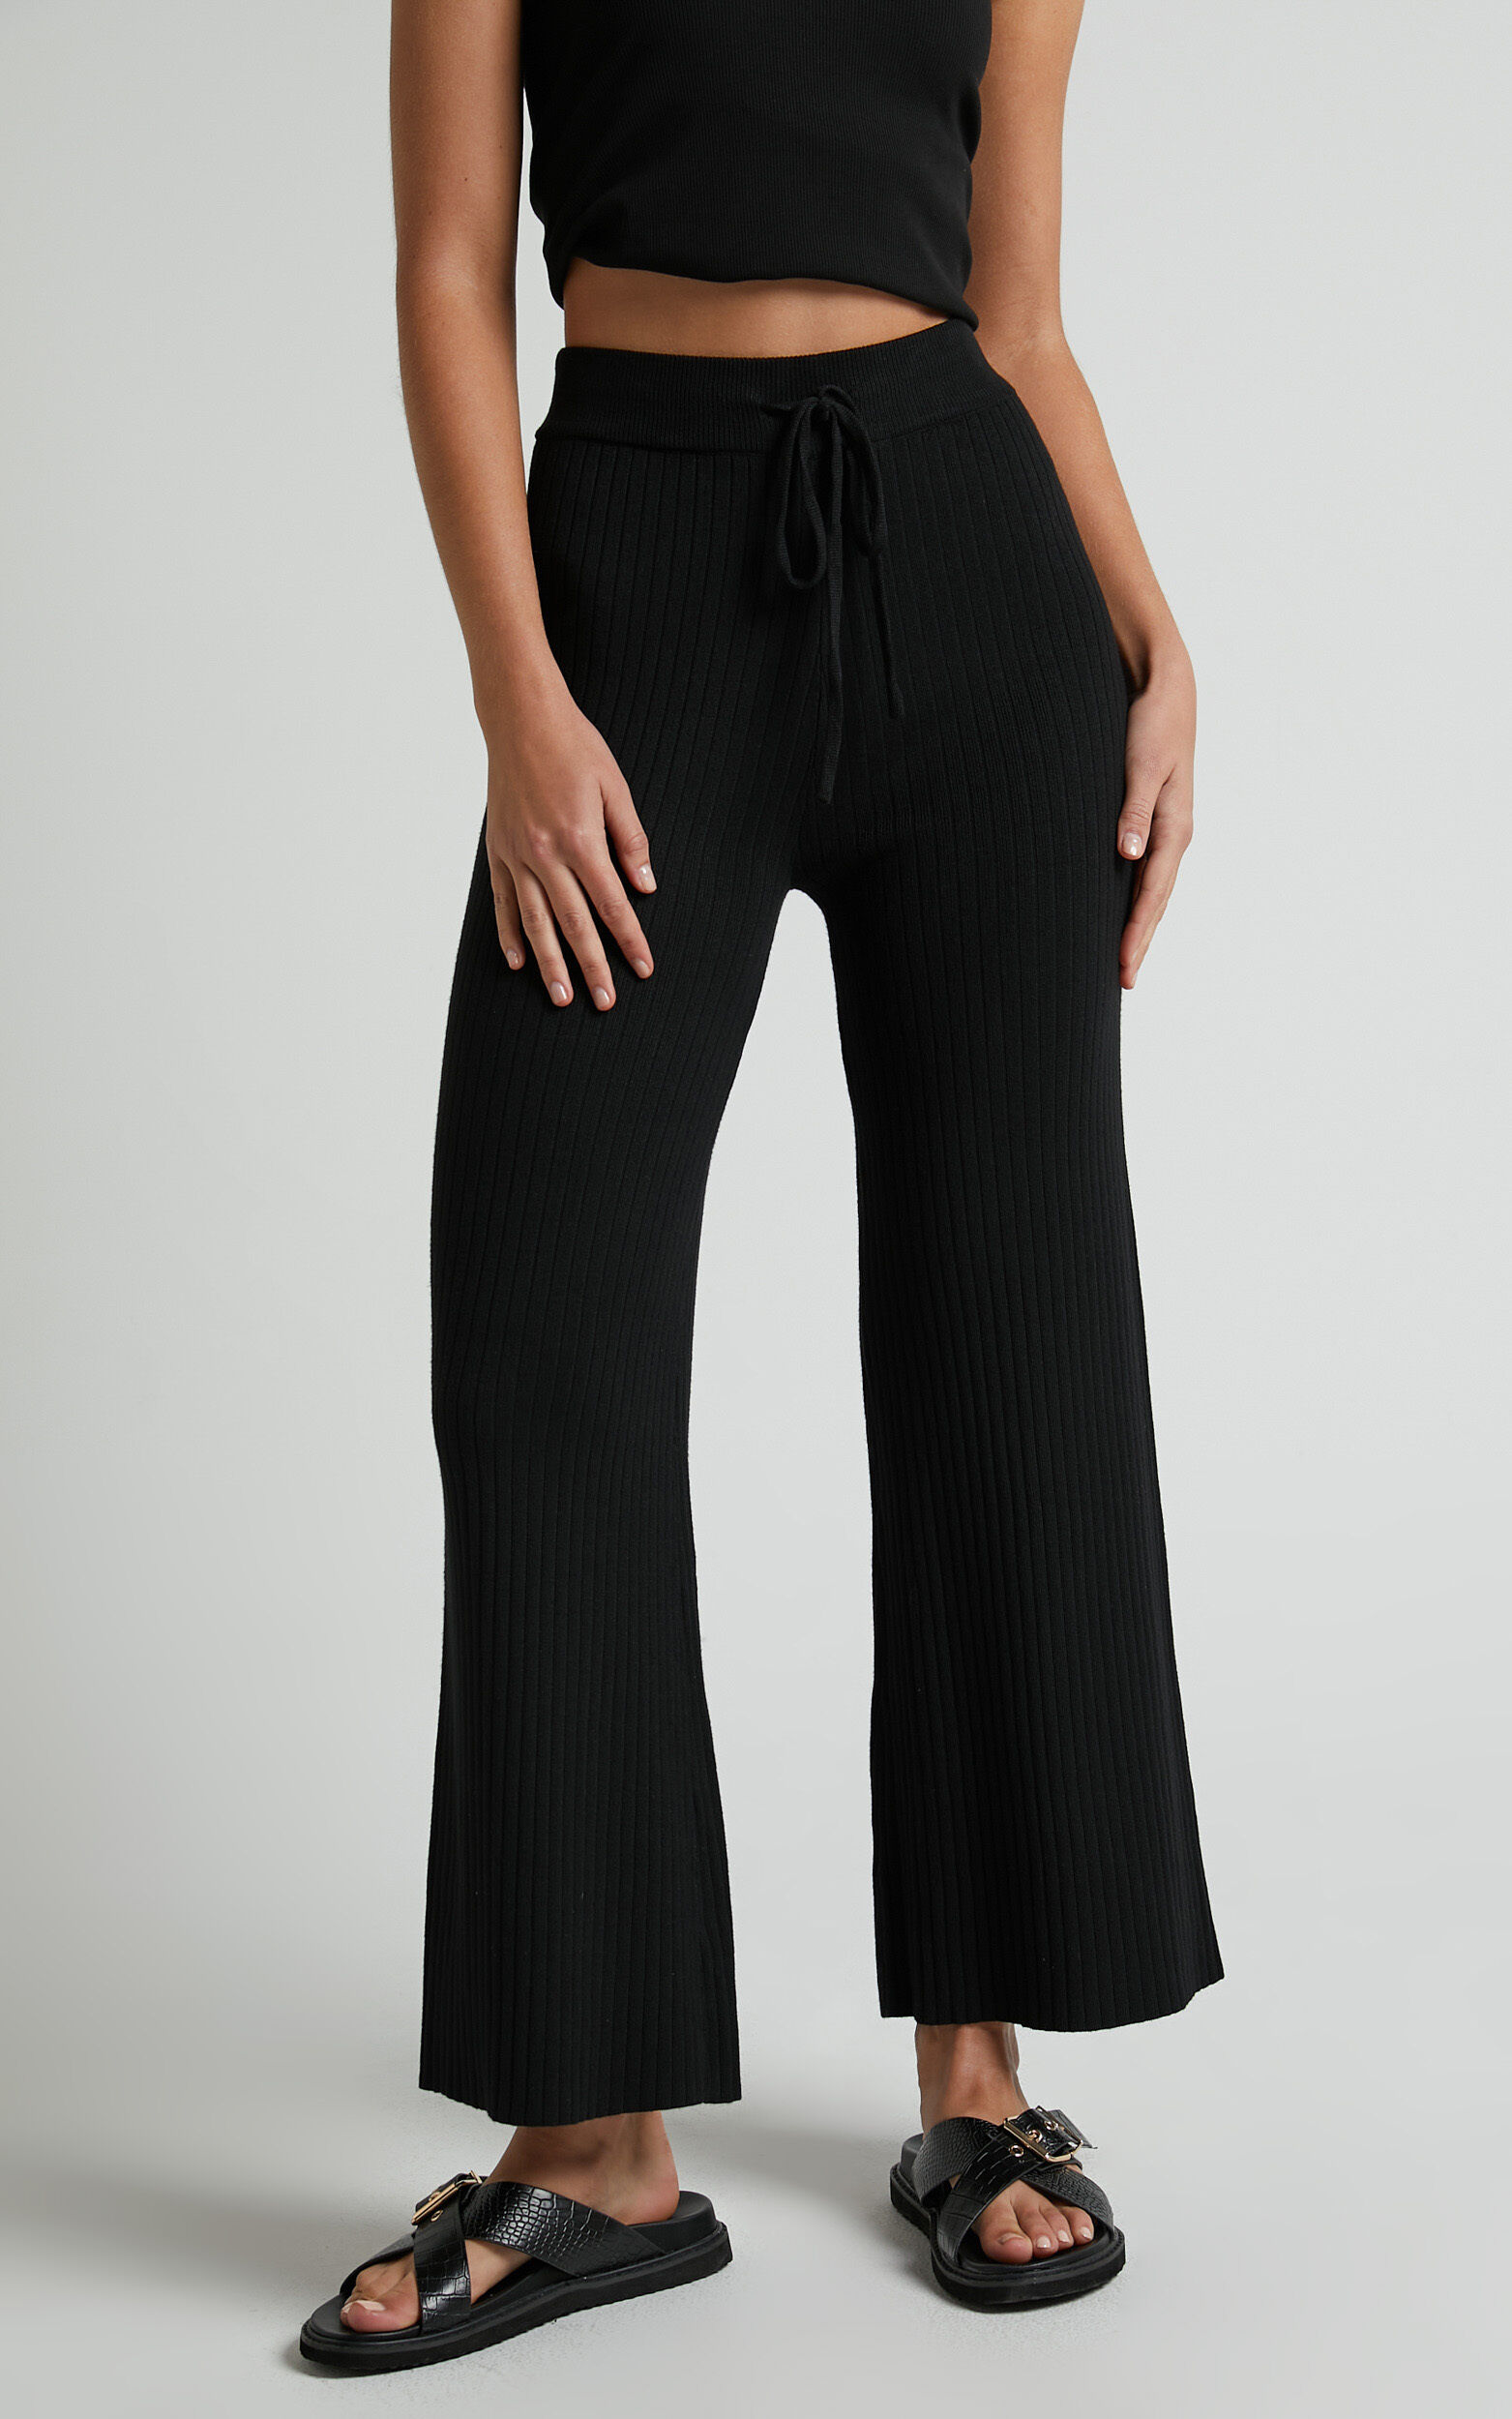 High Waisted Ribbed Pants Black  High waisted pants outfit, Knit